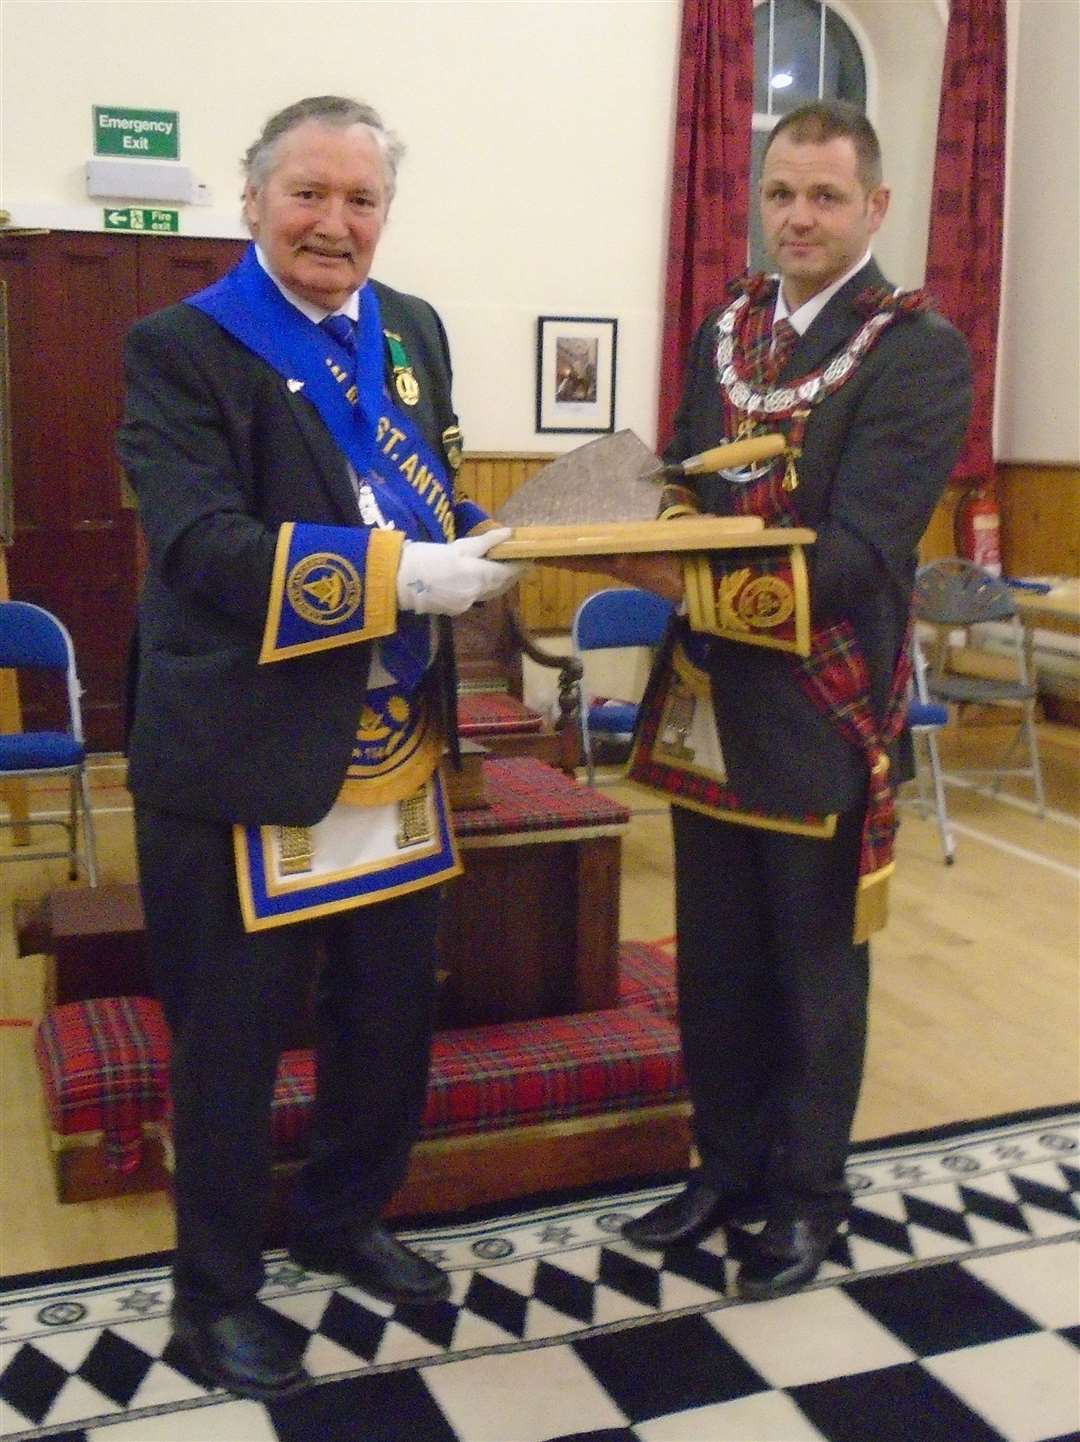 Lodge St. Anthony No. 154 RWM Brian Morton receives the Travelling Trowel from Lodge Royal Braemar No. 1195.